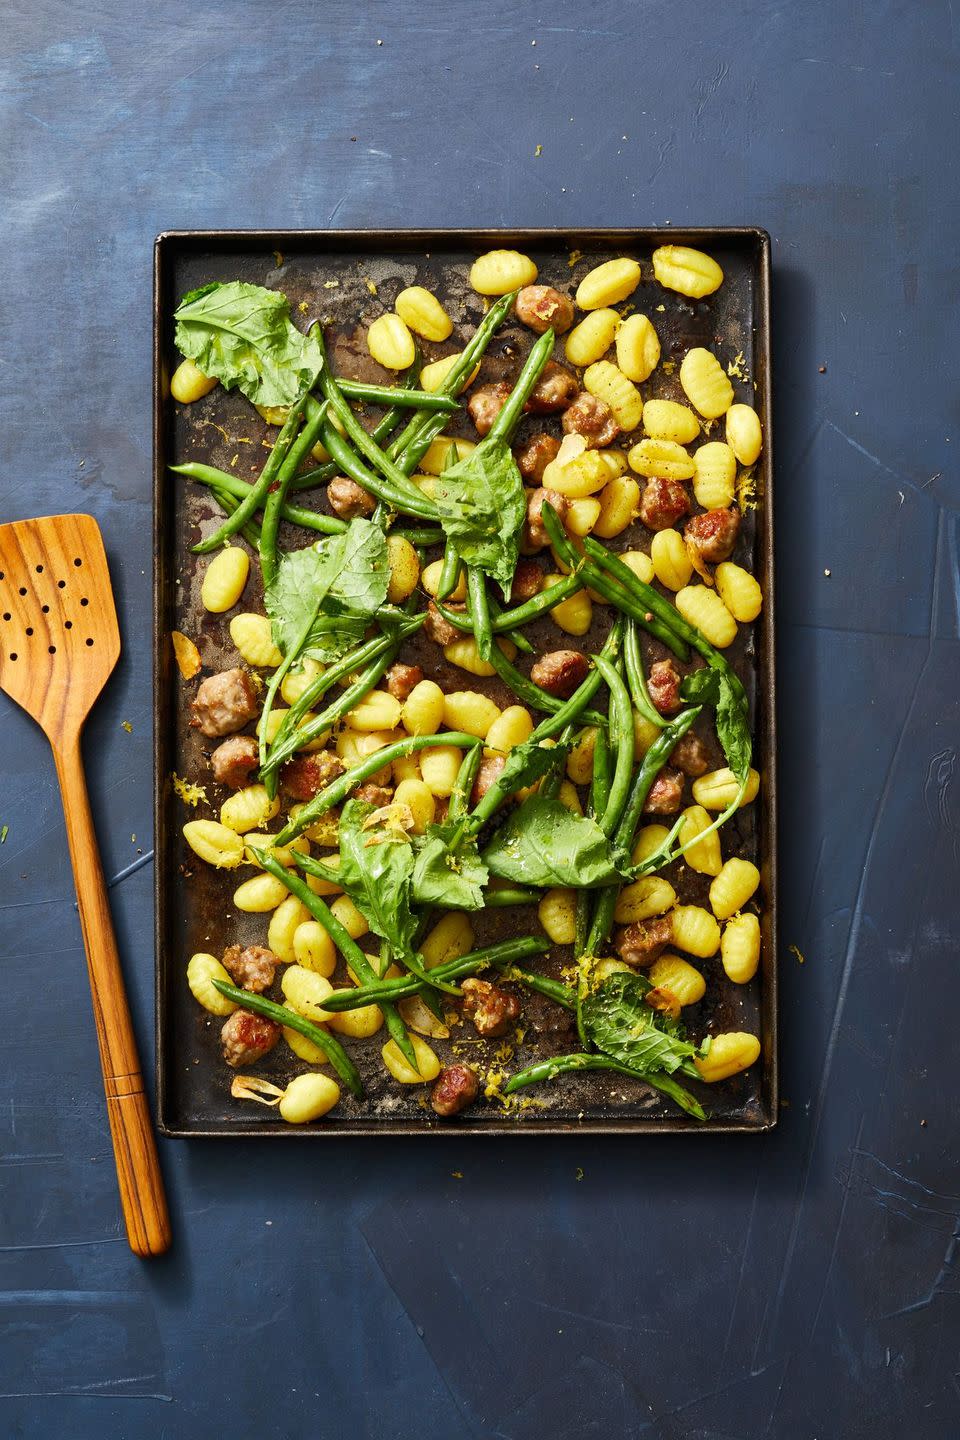 Sheet Pan Gnocchi with Sausage and Green Beans